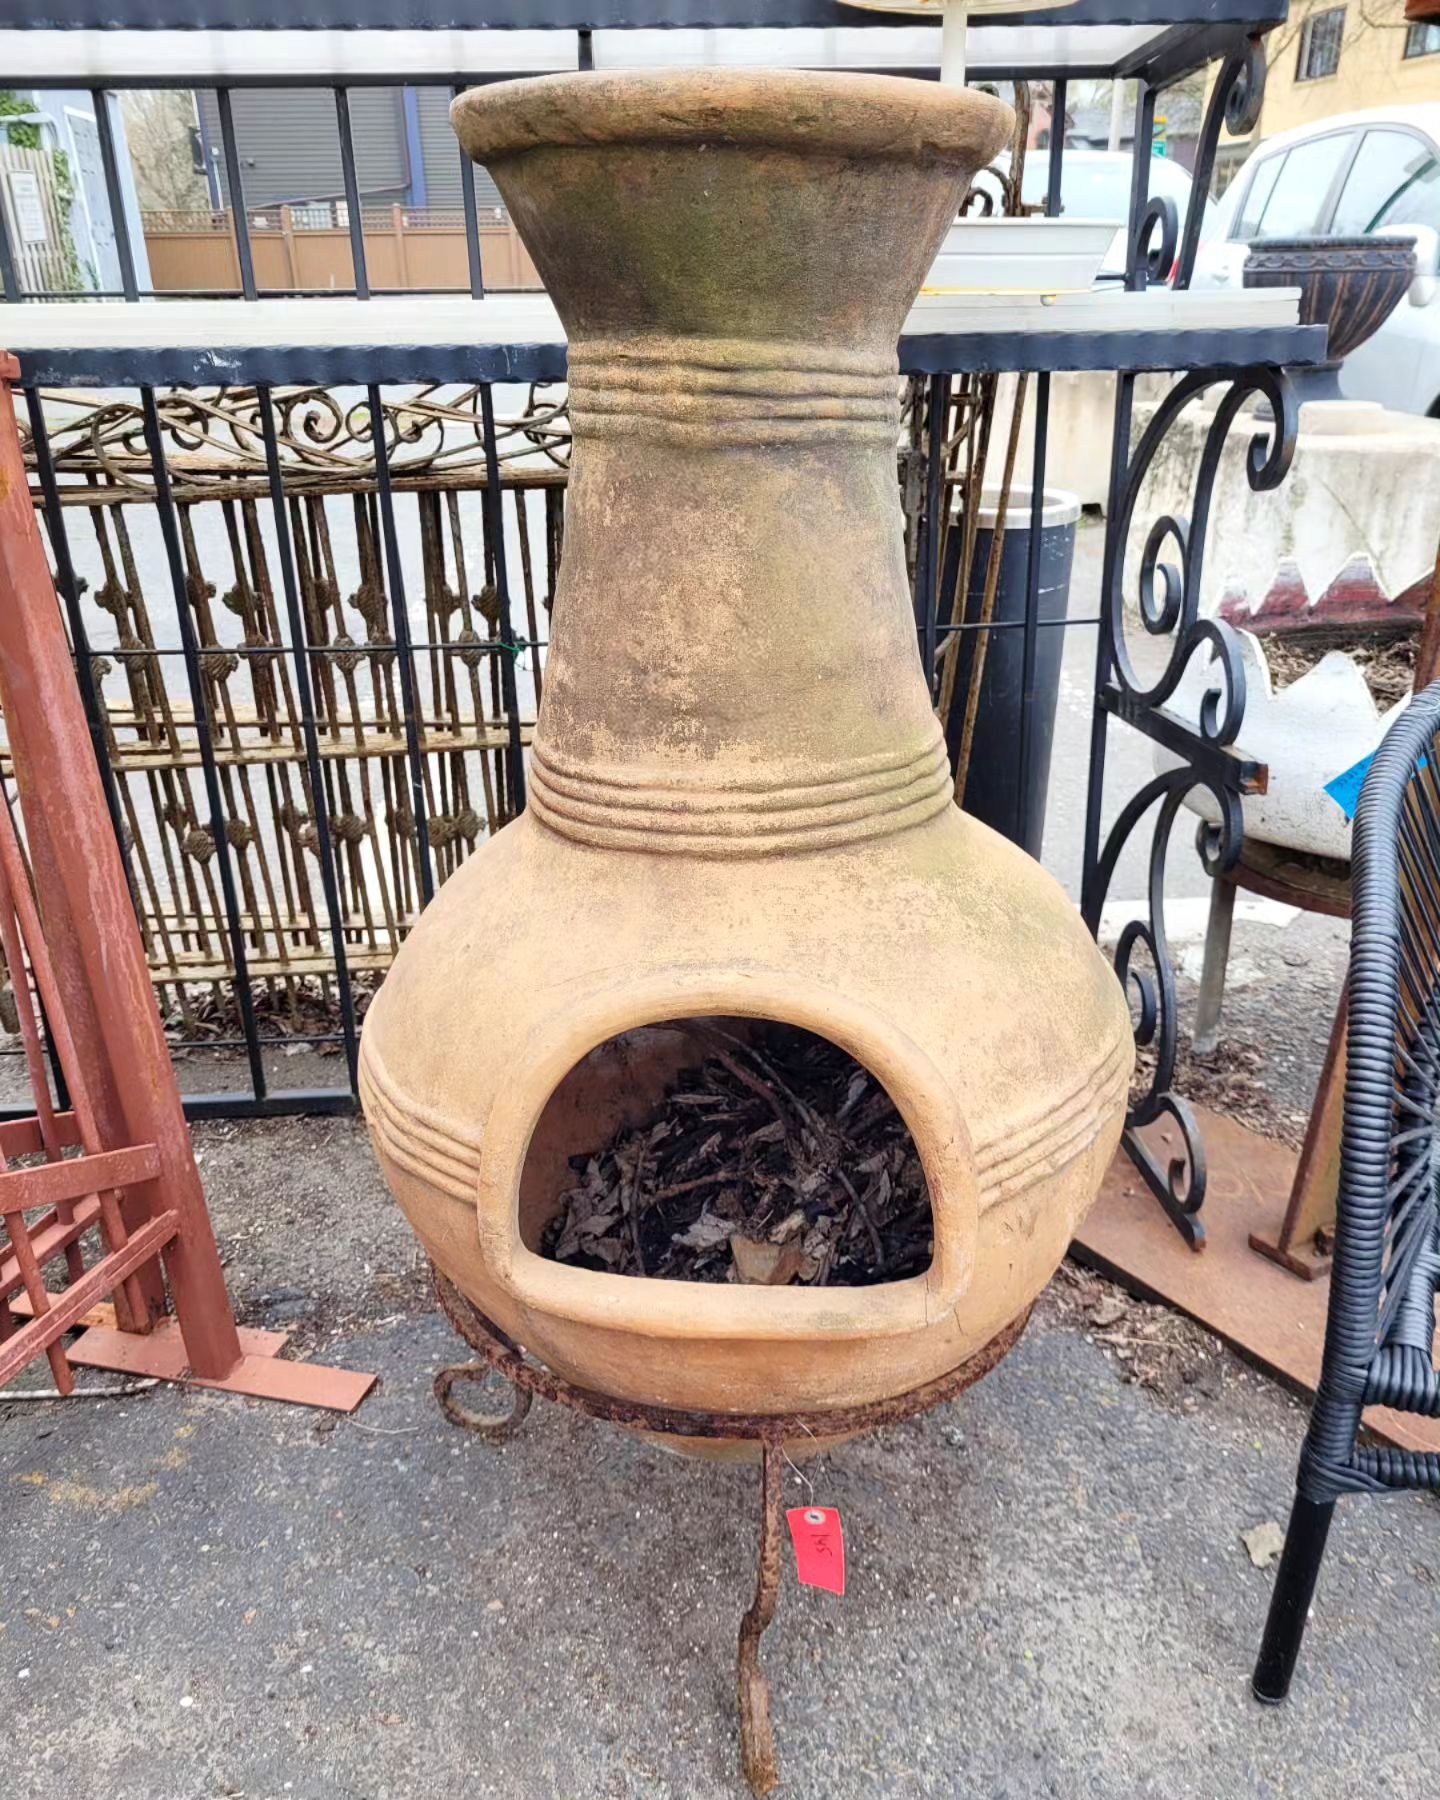 A chiminea is great for the chilly summer nights 

$145 

#mergegallery #frenchtownnj #chiminea #outdoors #patiodecor #firepit #summernights #garden #gardendecor #gardendesign #fireplace